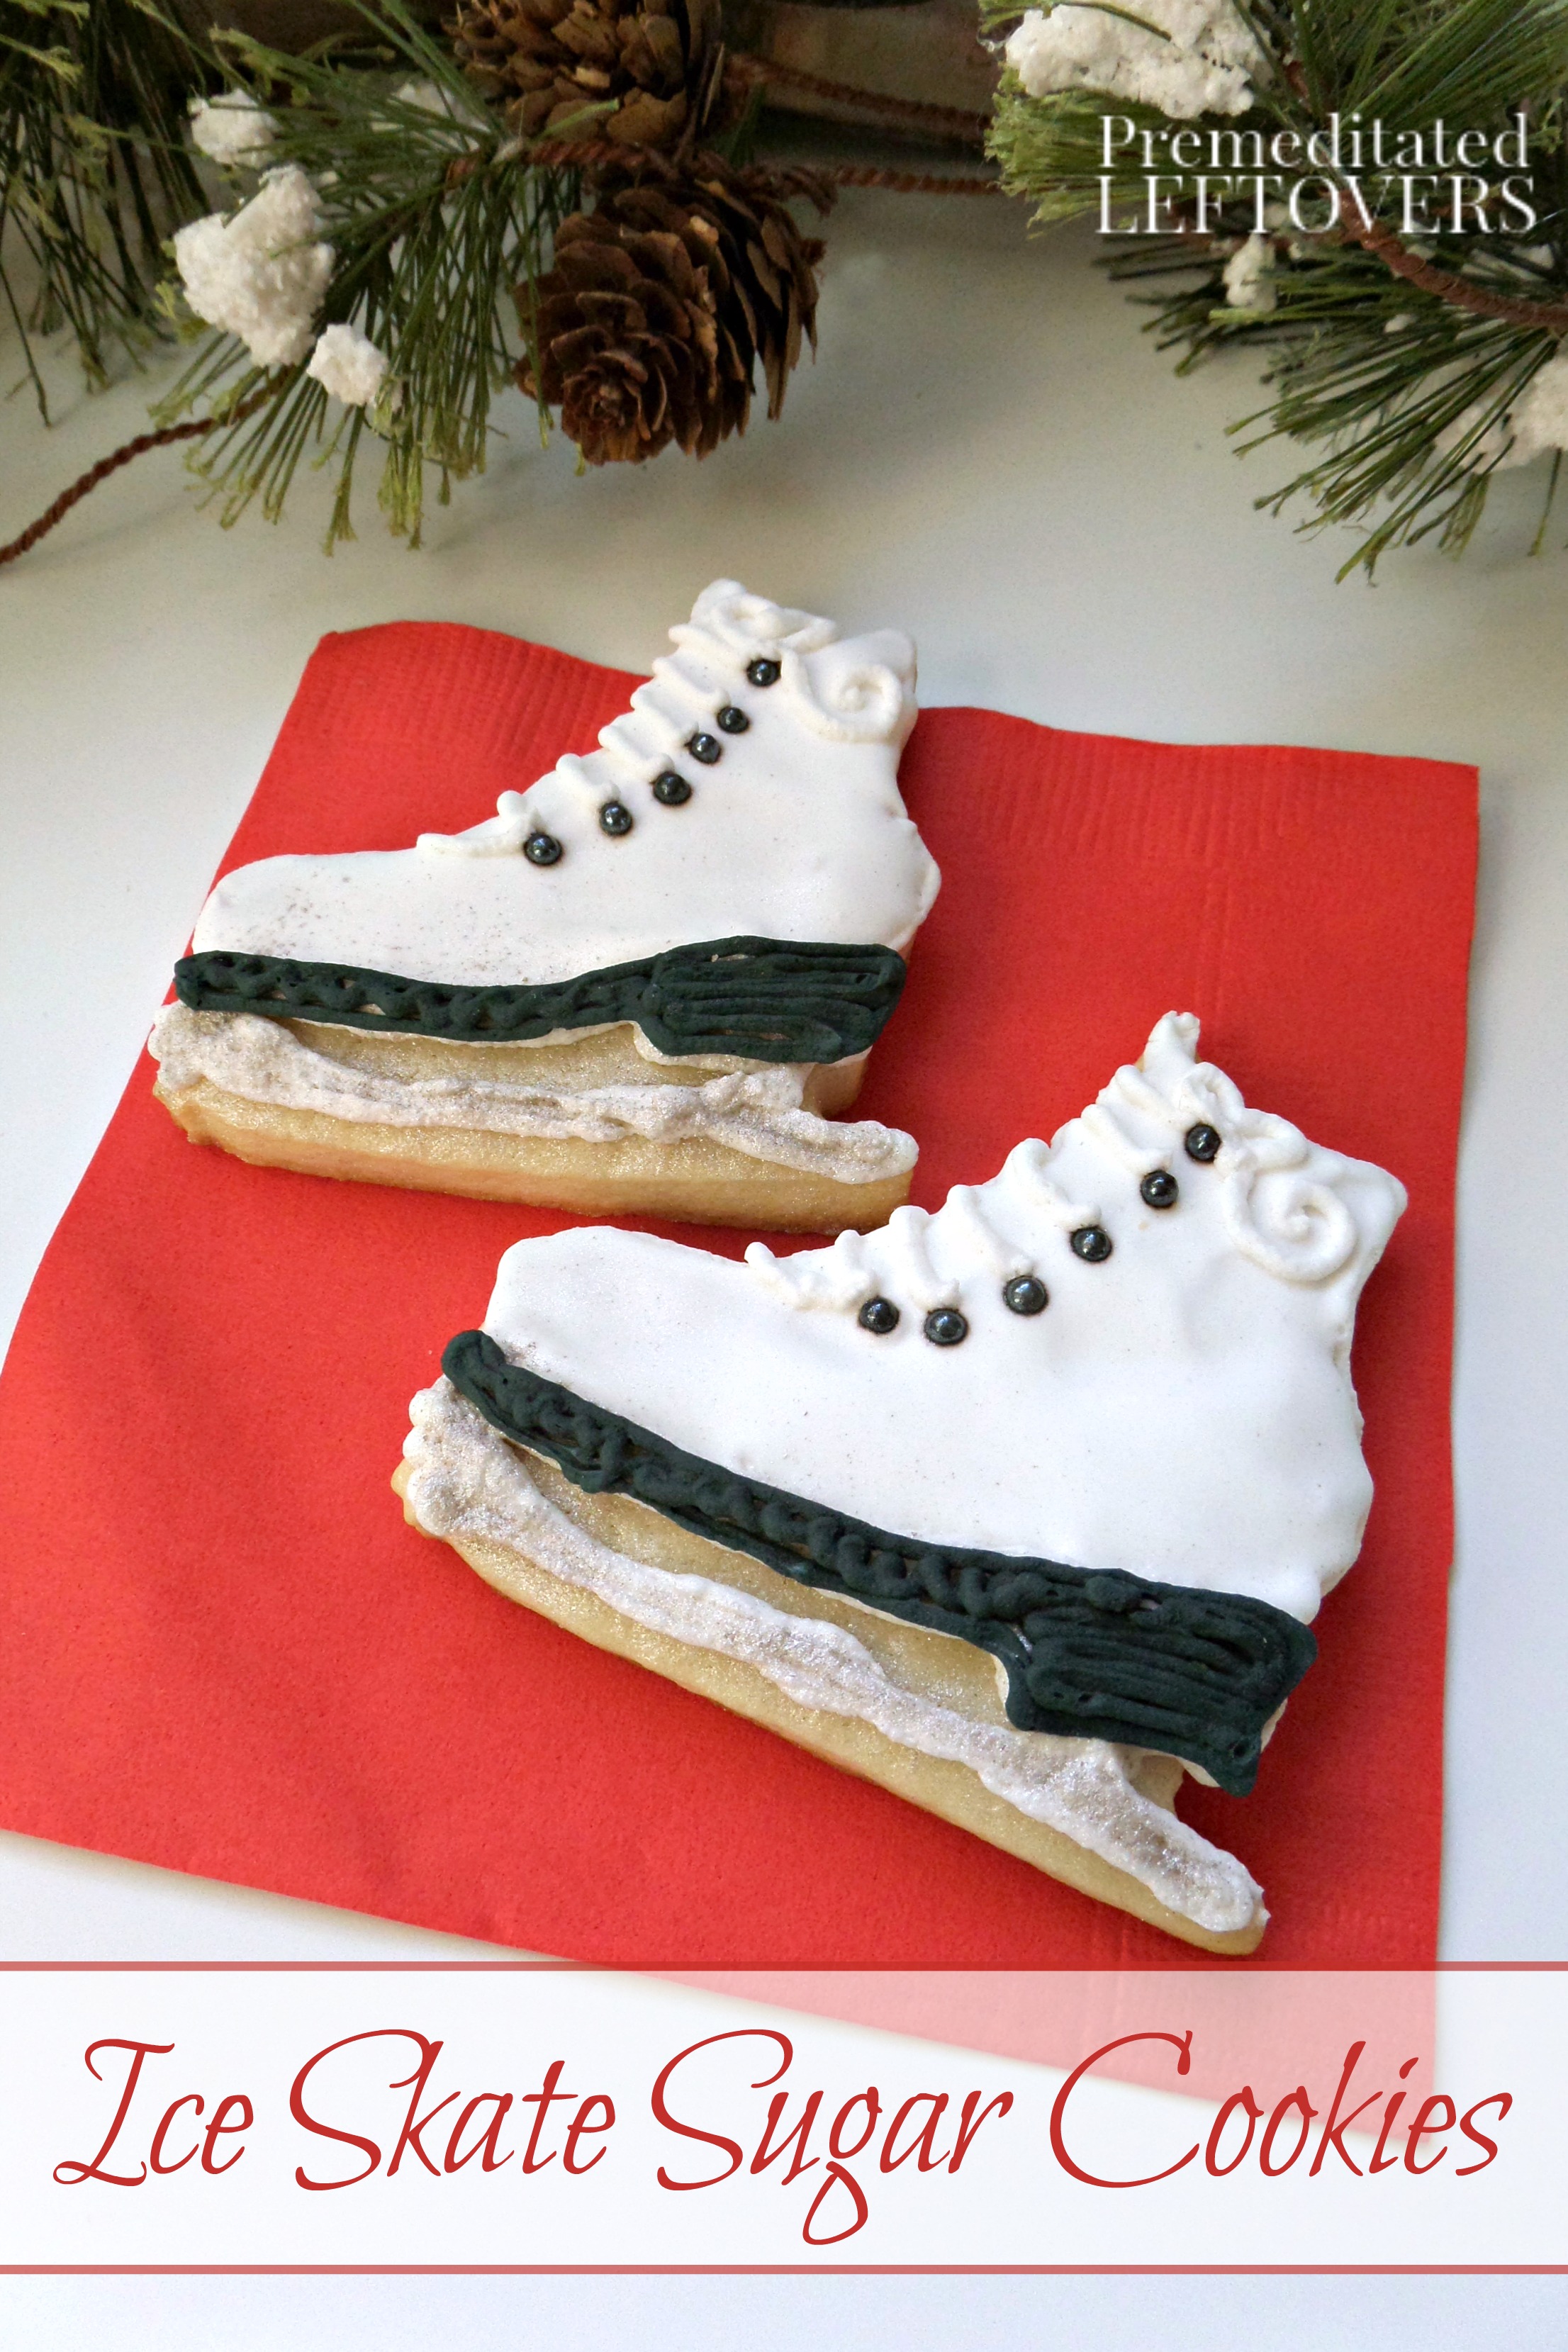 How to Make and Decorate Ice-Skate Sugar Cookies